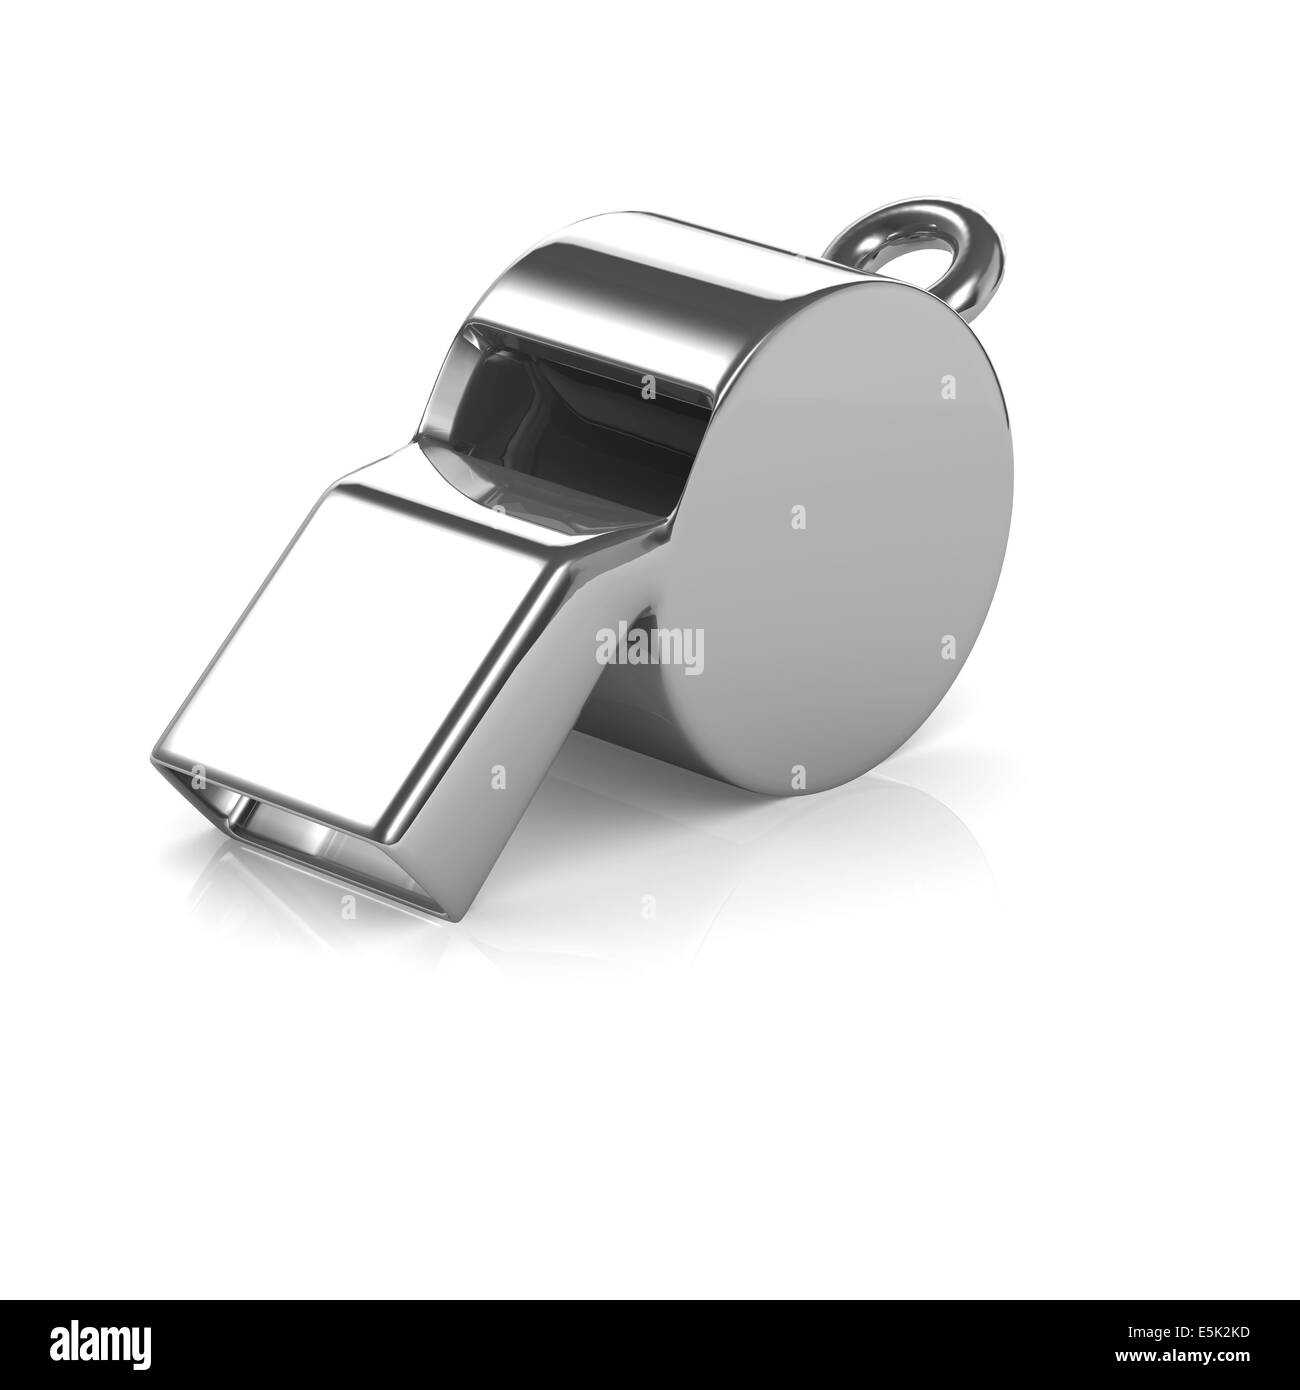 3d render of a referee's whistle Stock Photo